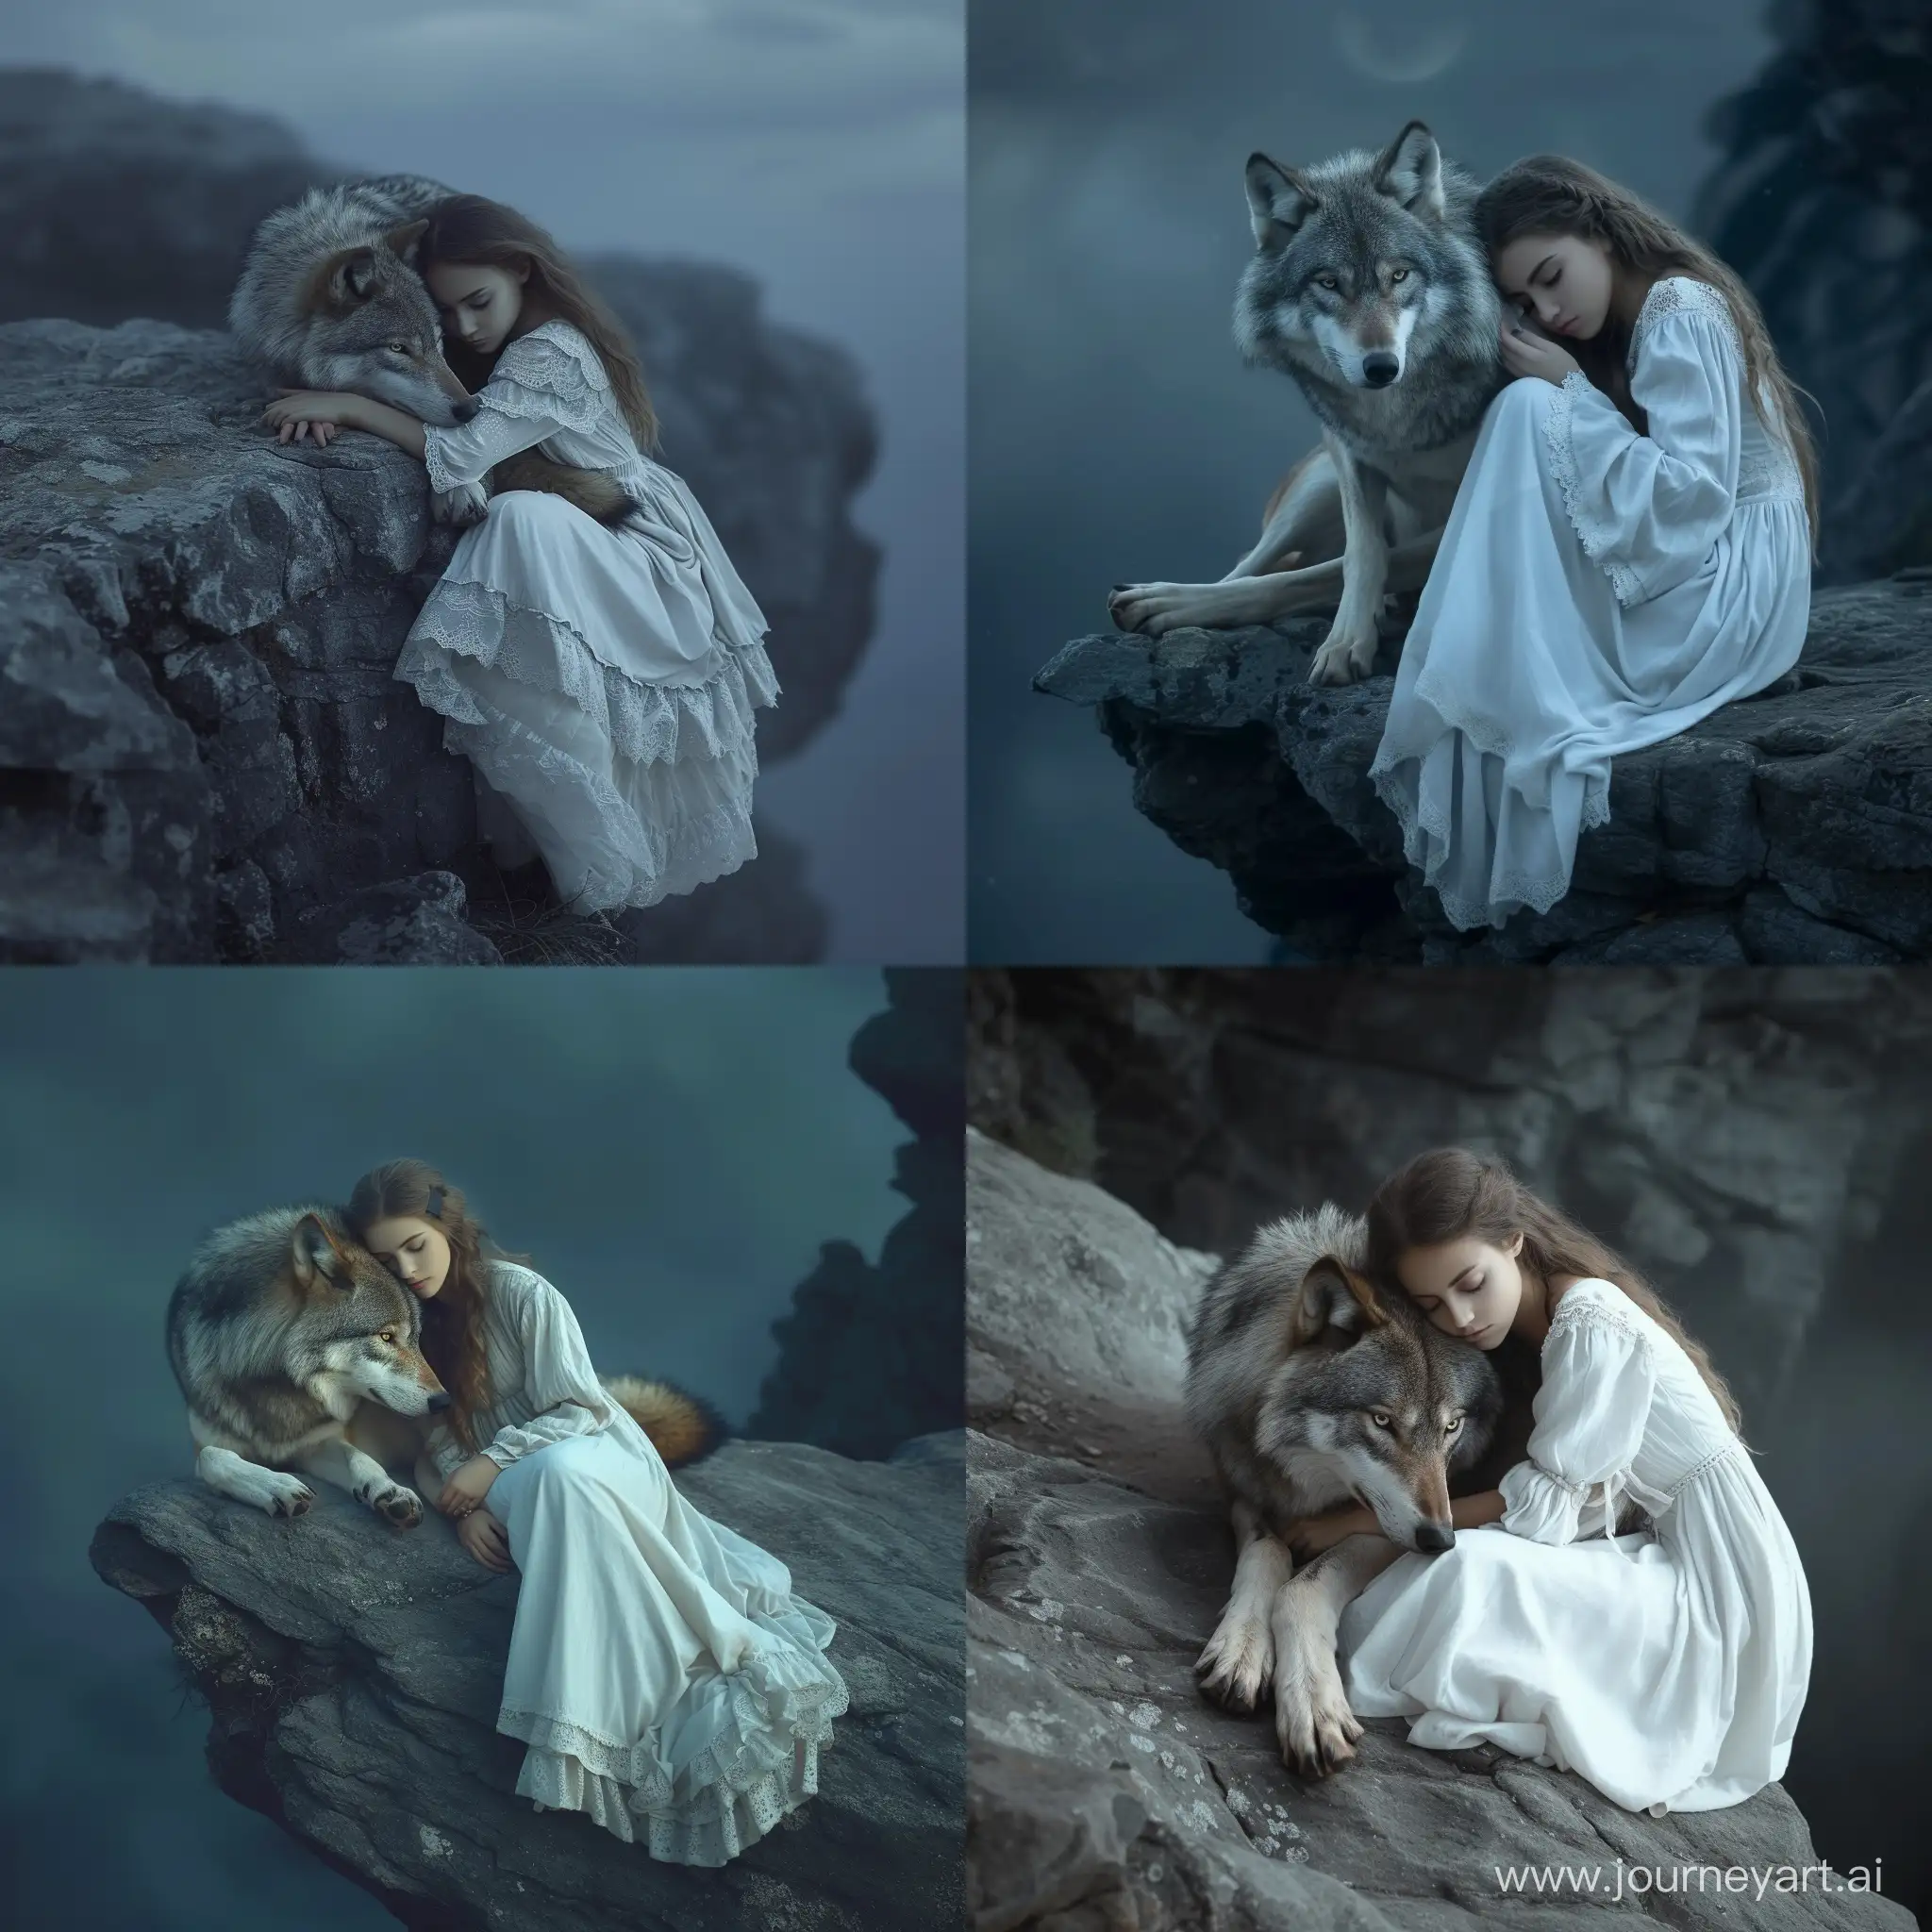 One wolf and a beautiful girl wearing white long dress, snuggling on the cliff, lonely, sad, cold night